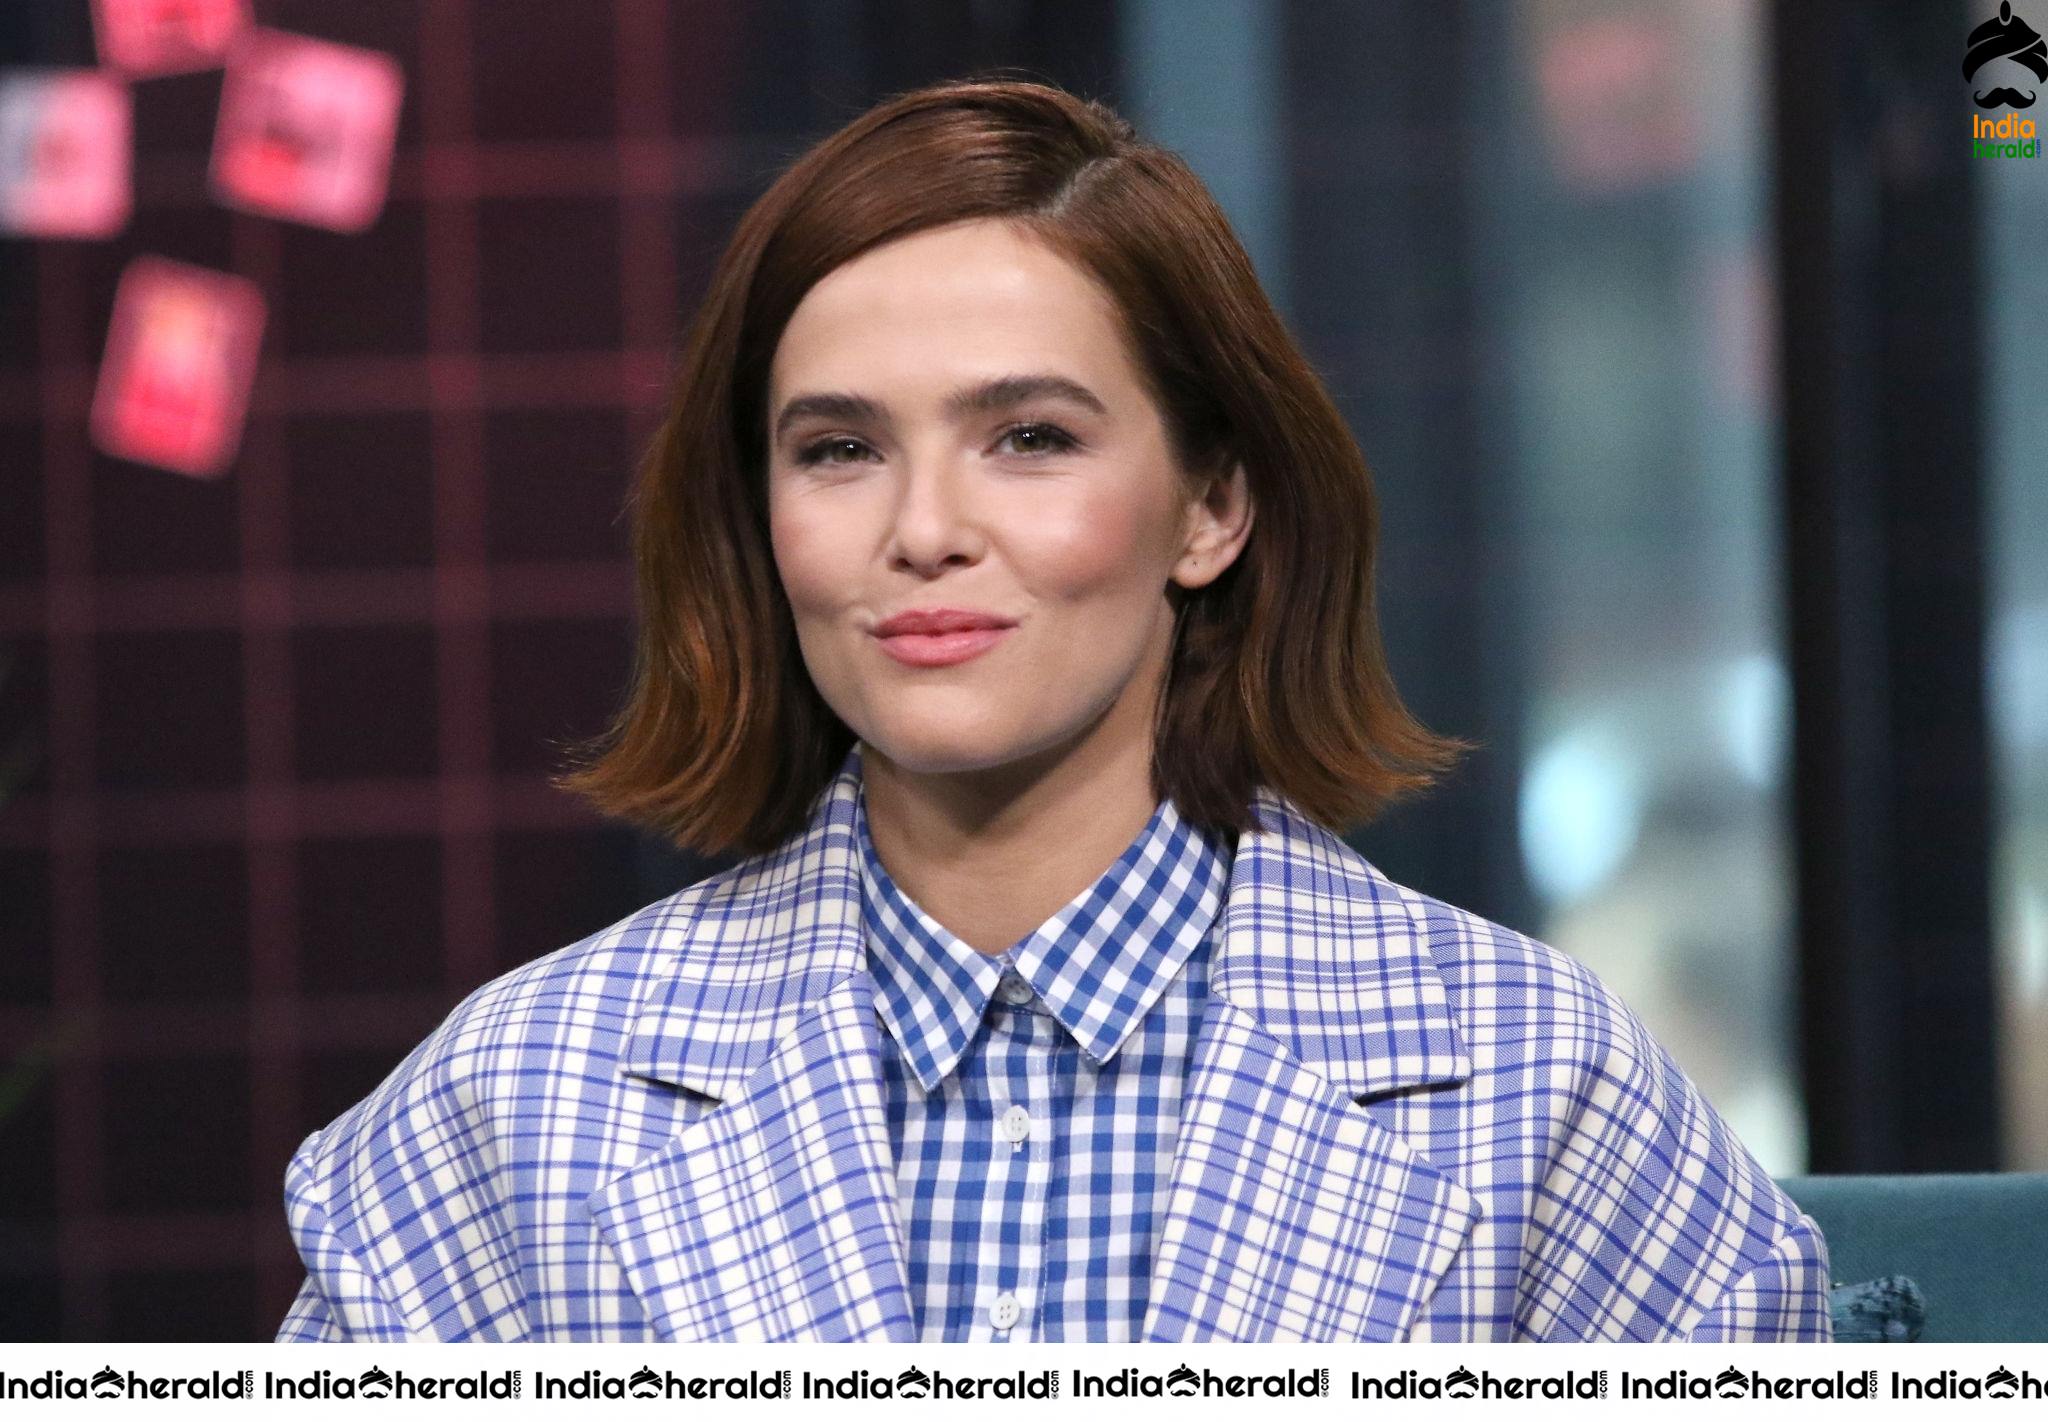 Zoey Deutch Attends the Build Series to discuss Buffaloed at Build Studio in New York